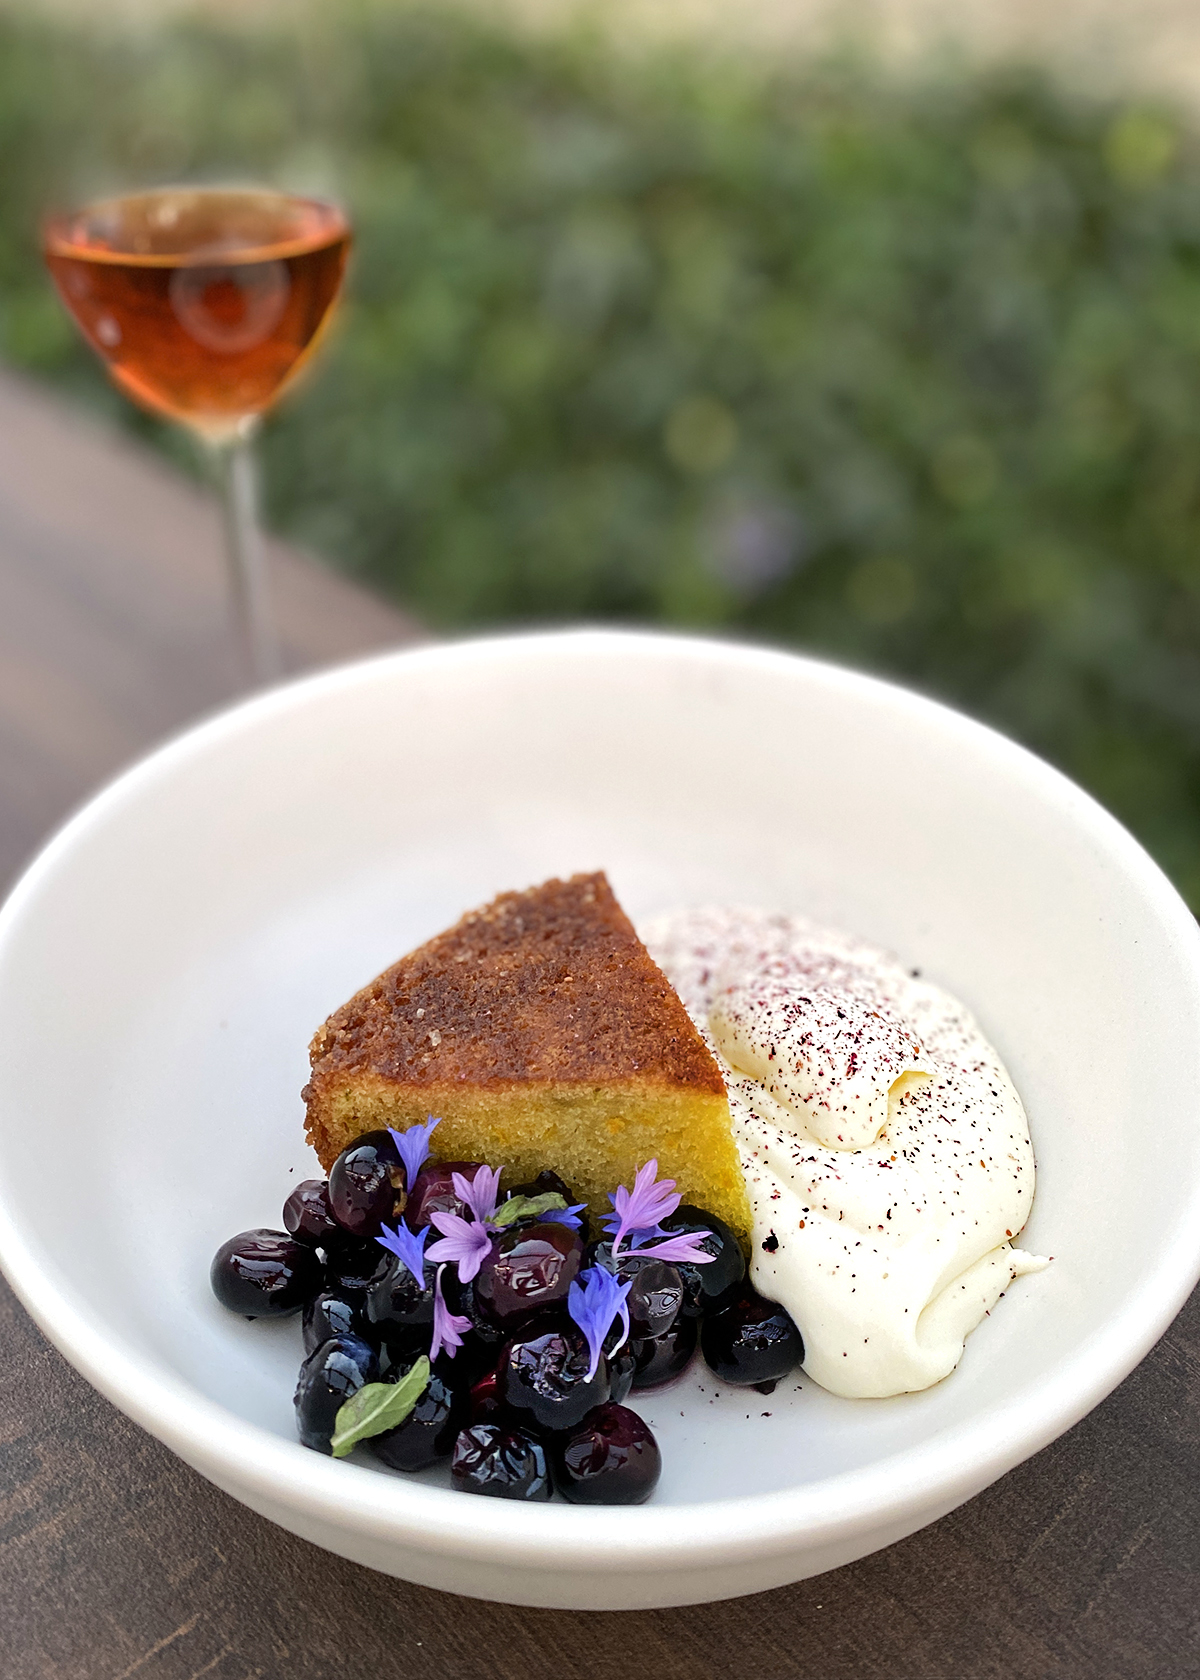 olive oil cake with blueberries at cella ristorante